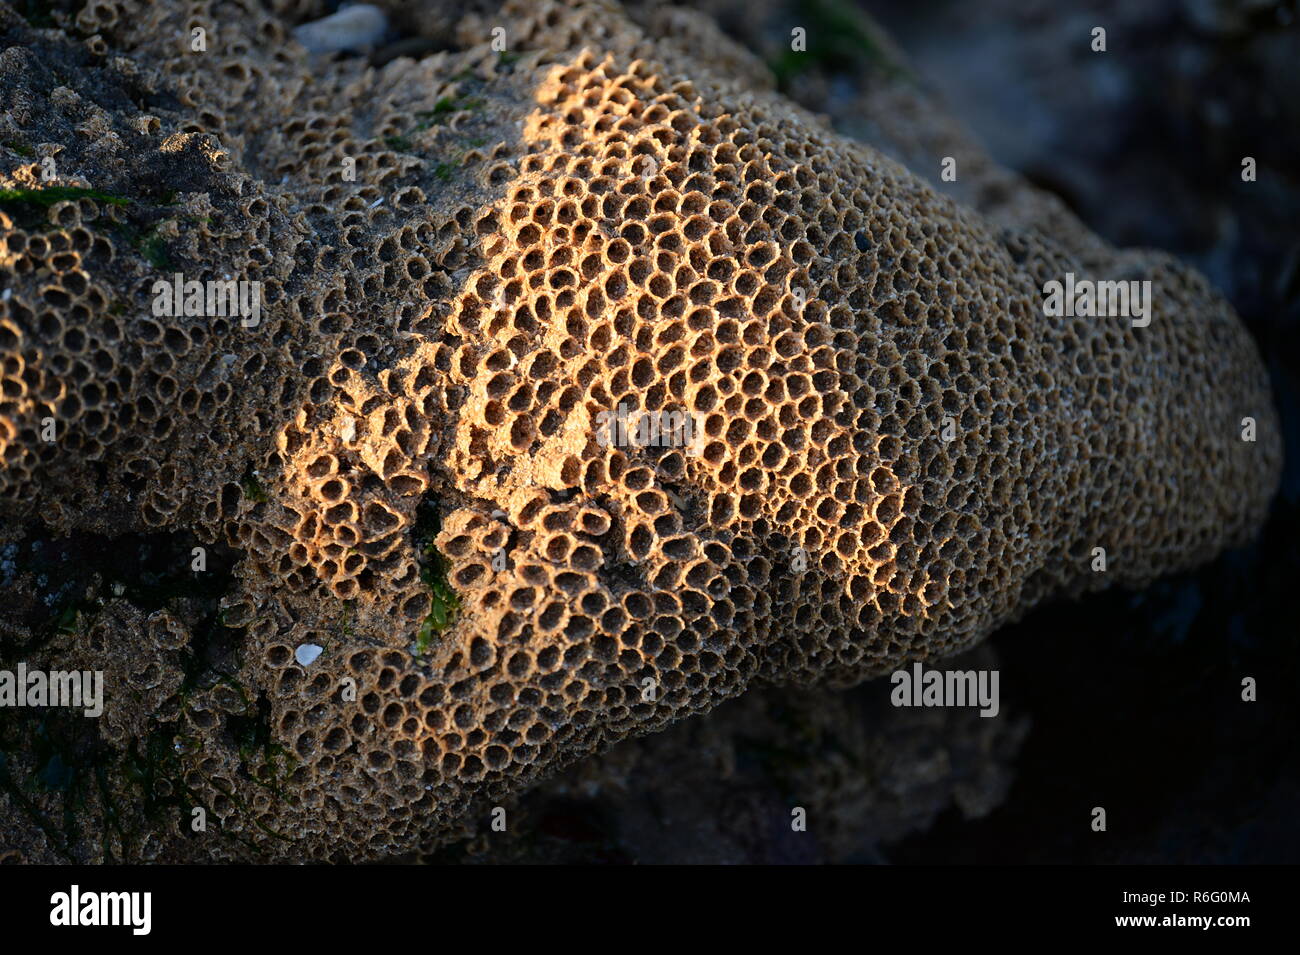 Low morning light gives contrast to the honeycomb structure of sand/ shell fragments that forms the home for this beach colony of segmented worms Stock Photo